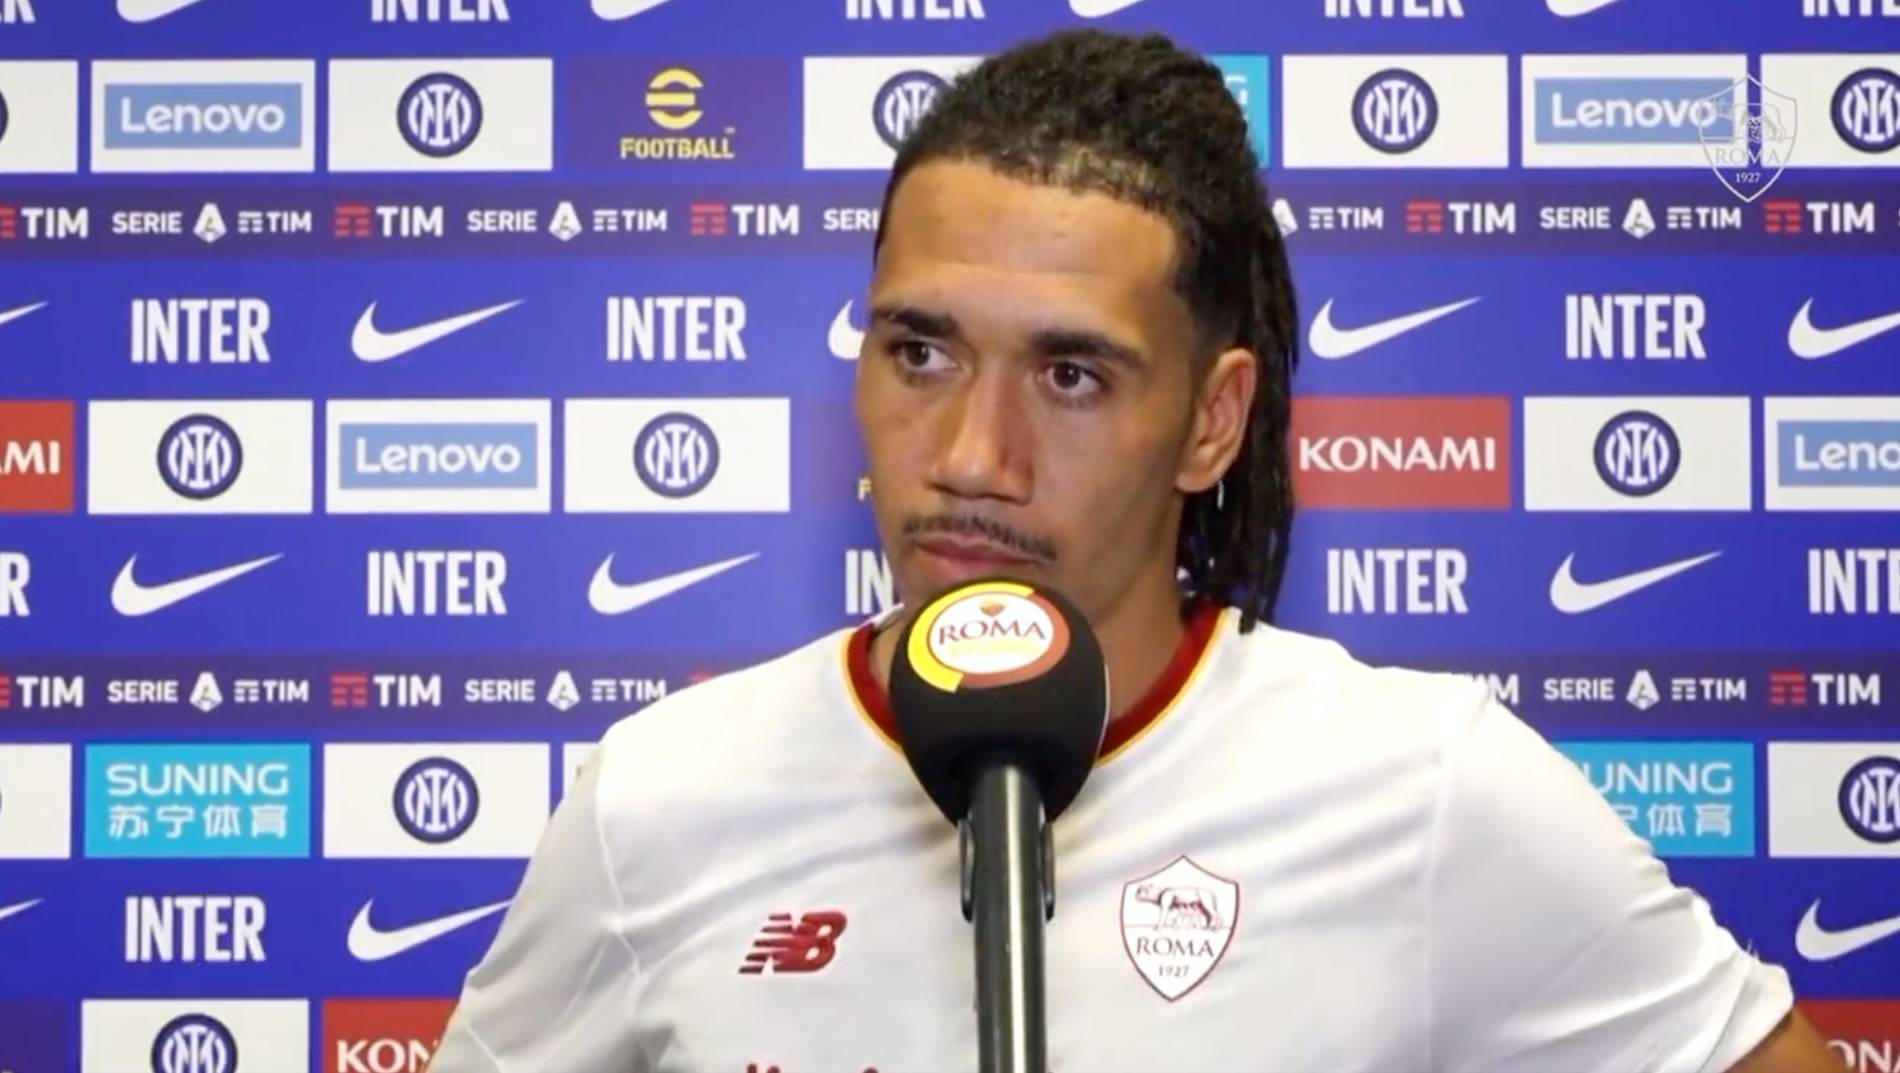 Chris Smalling post-match interview in Italian